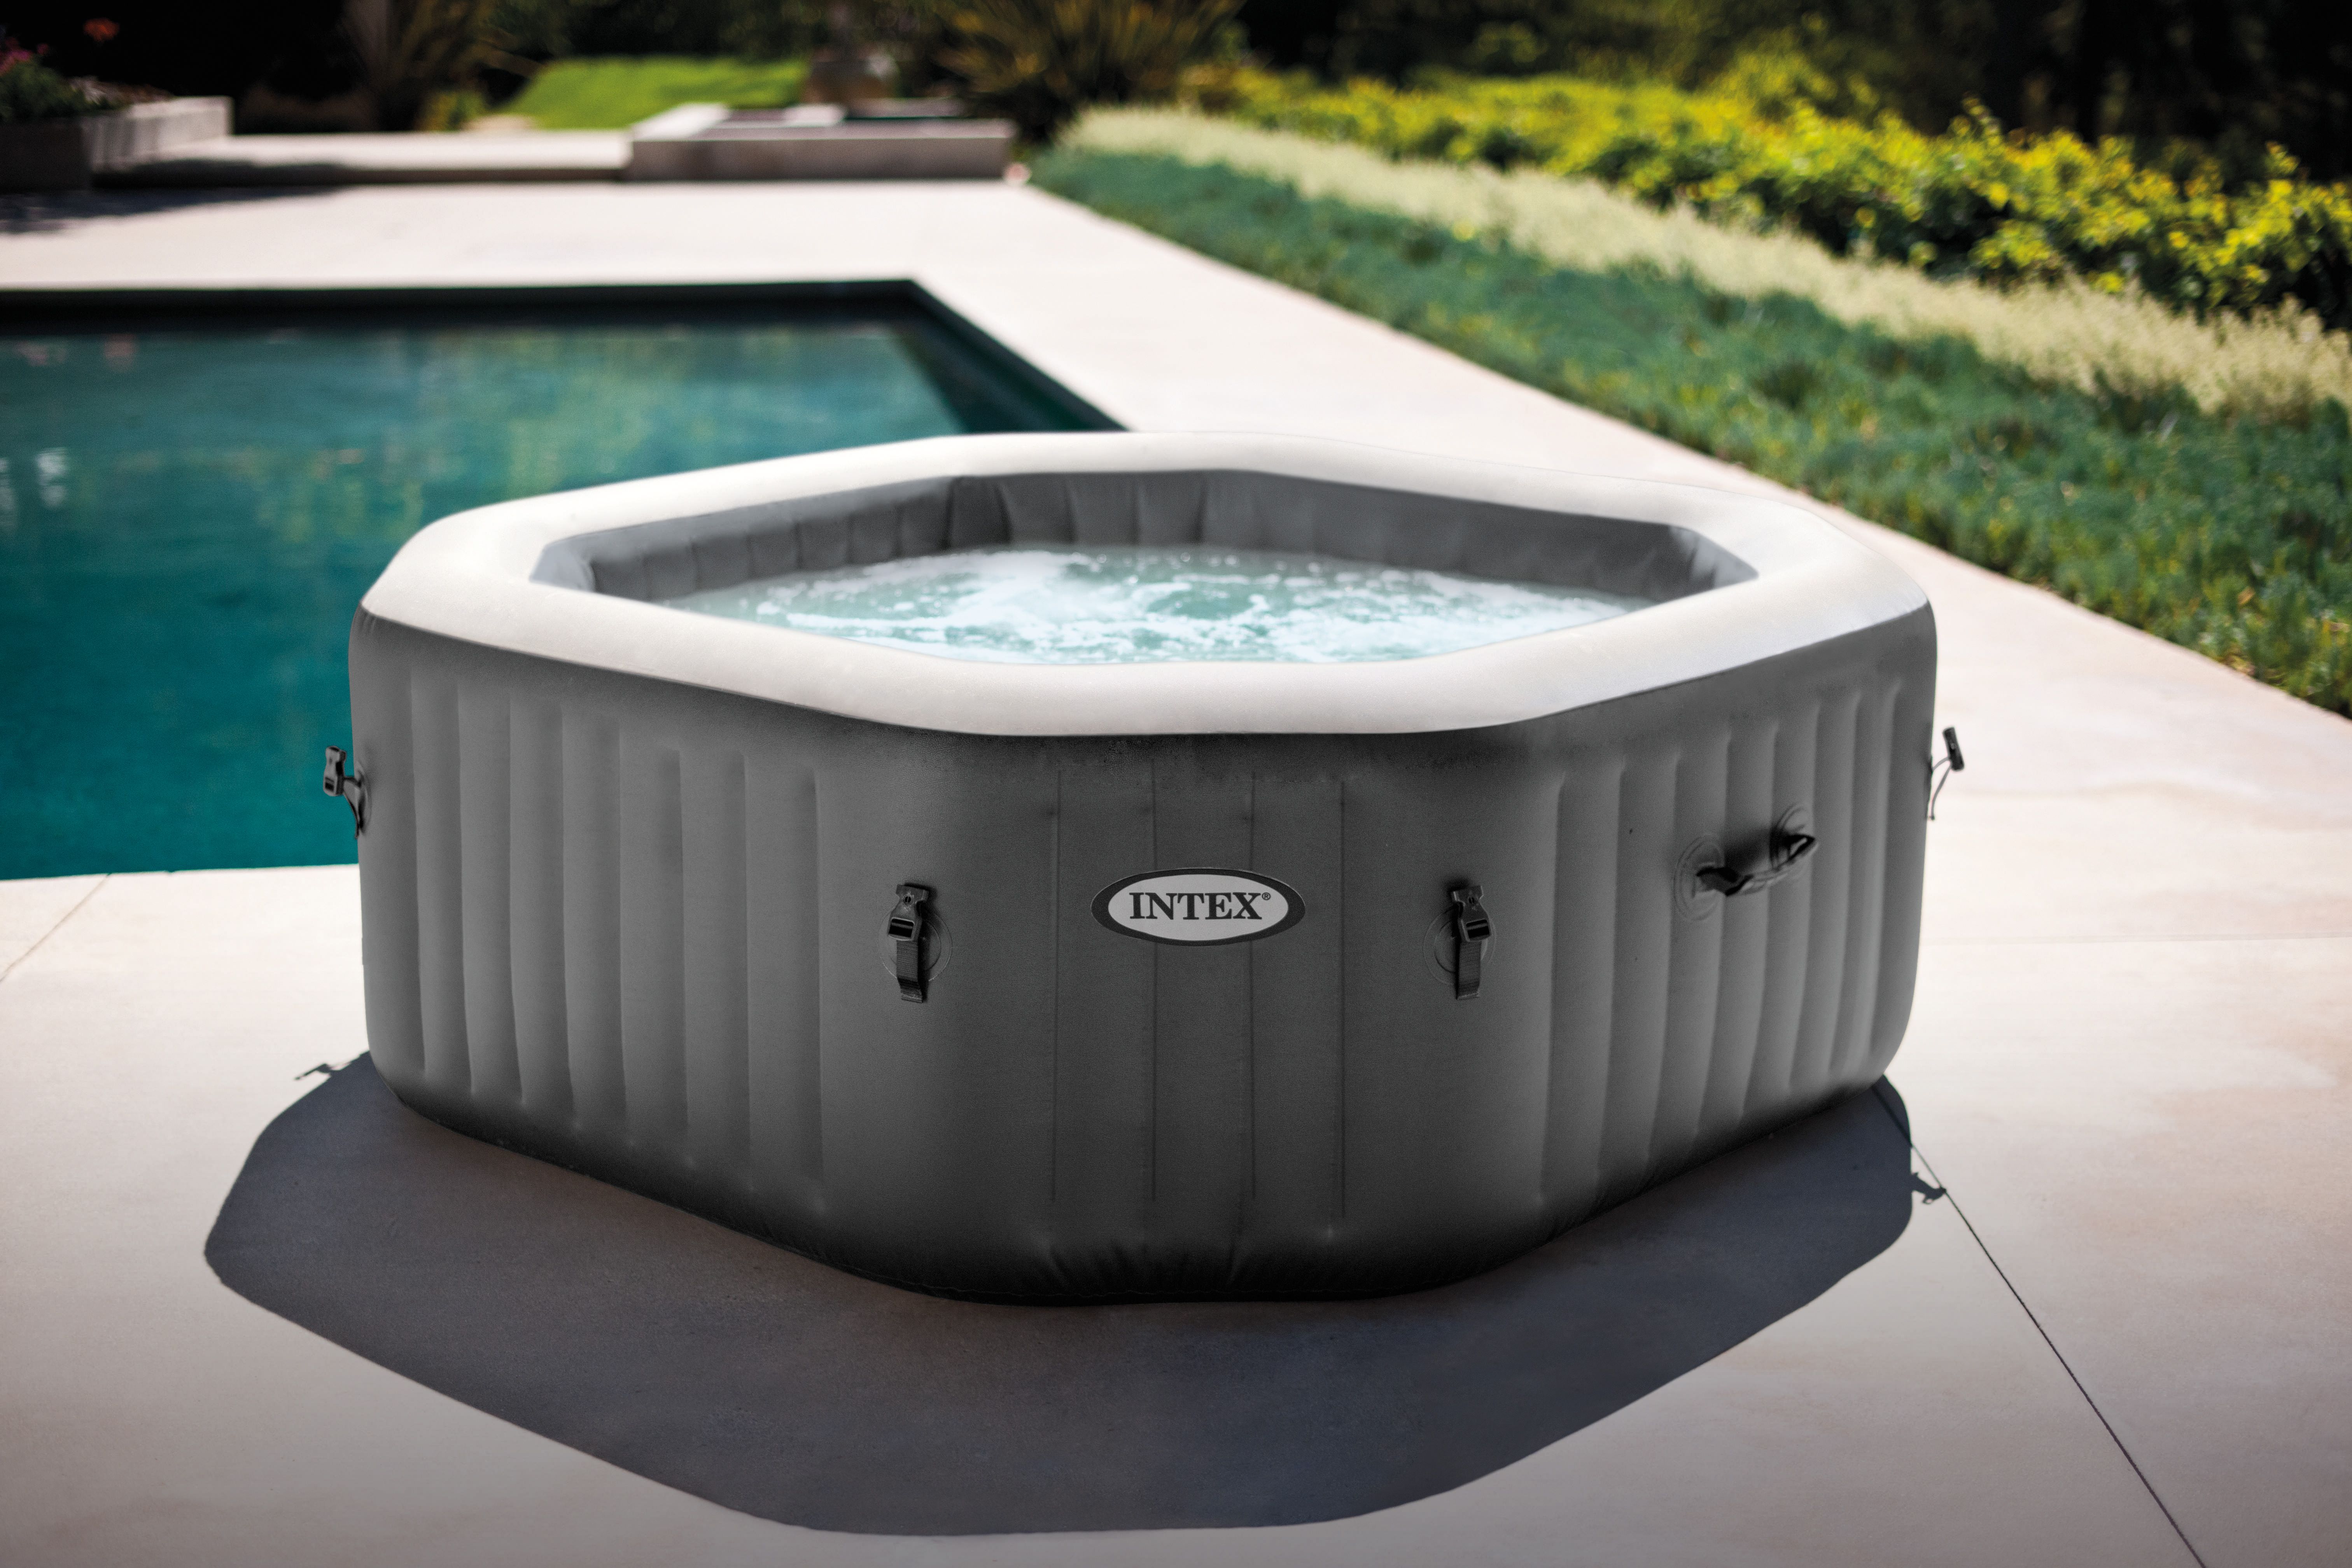 Aldi Hot Tub Available To Buy Now For £399.99 - Aldi Spa Pool